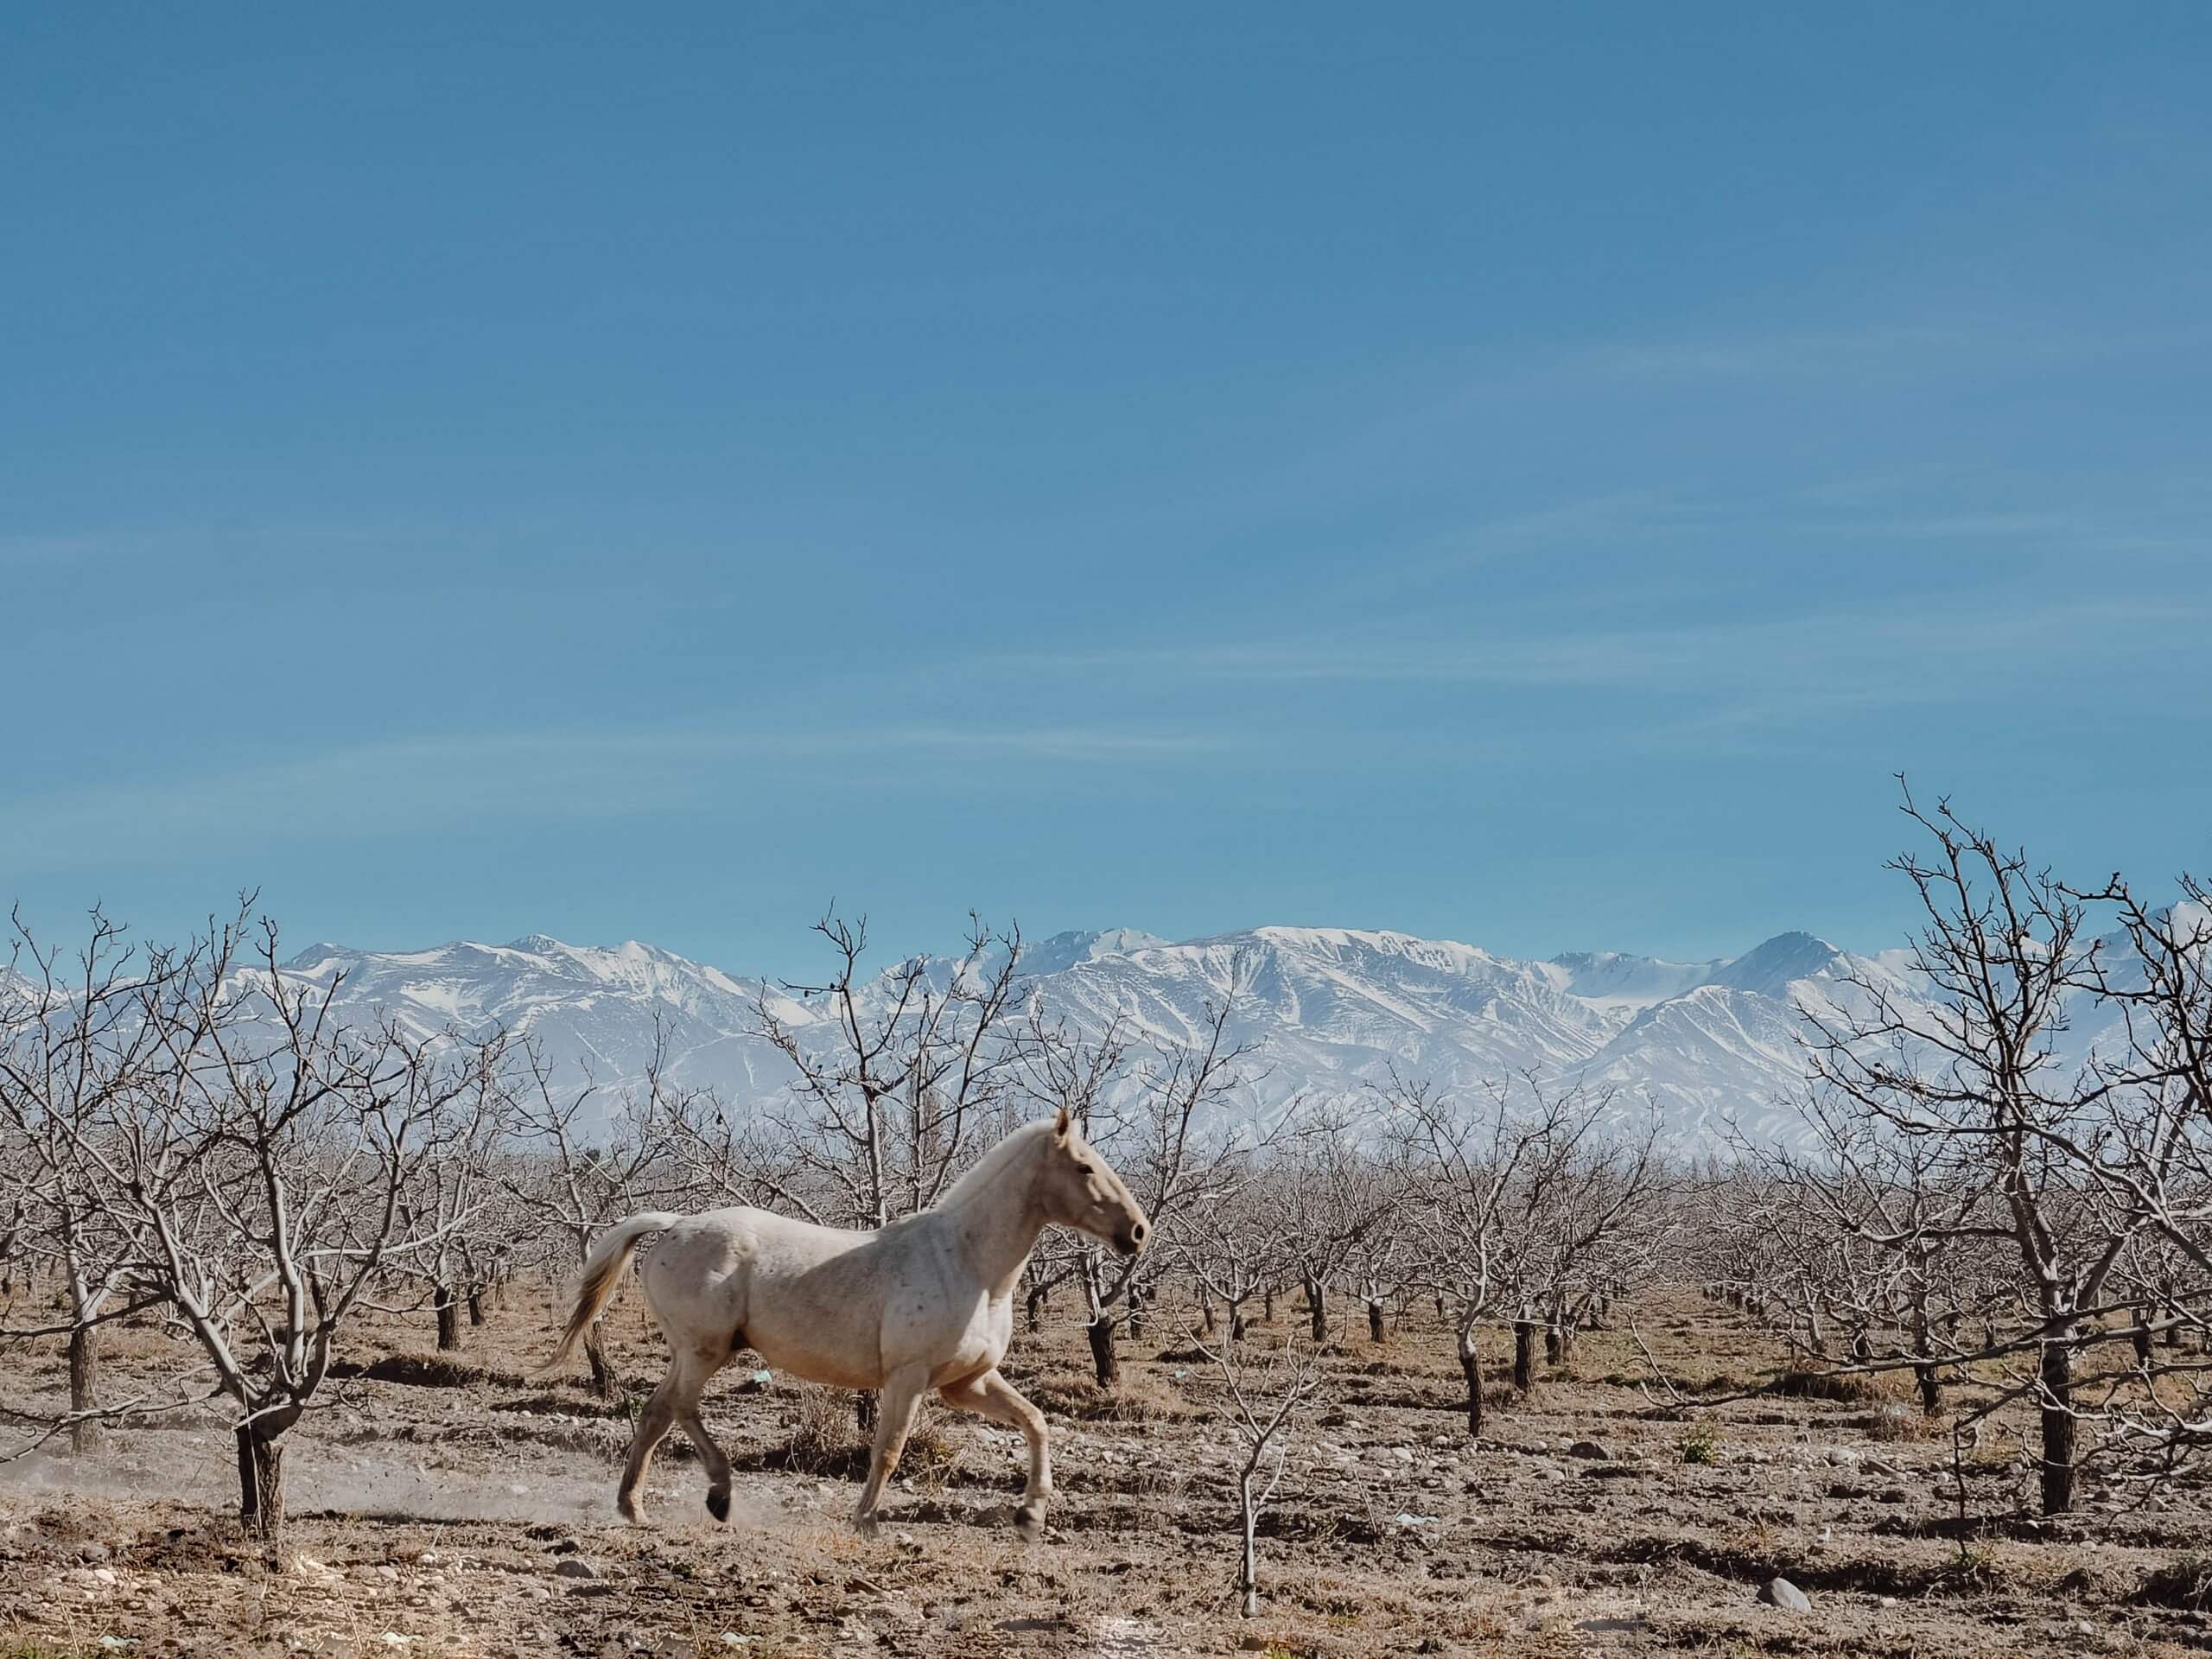 White horse in Mendoza vineyards and the mountains behind